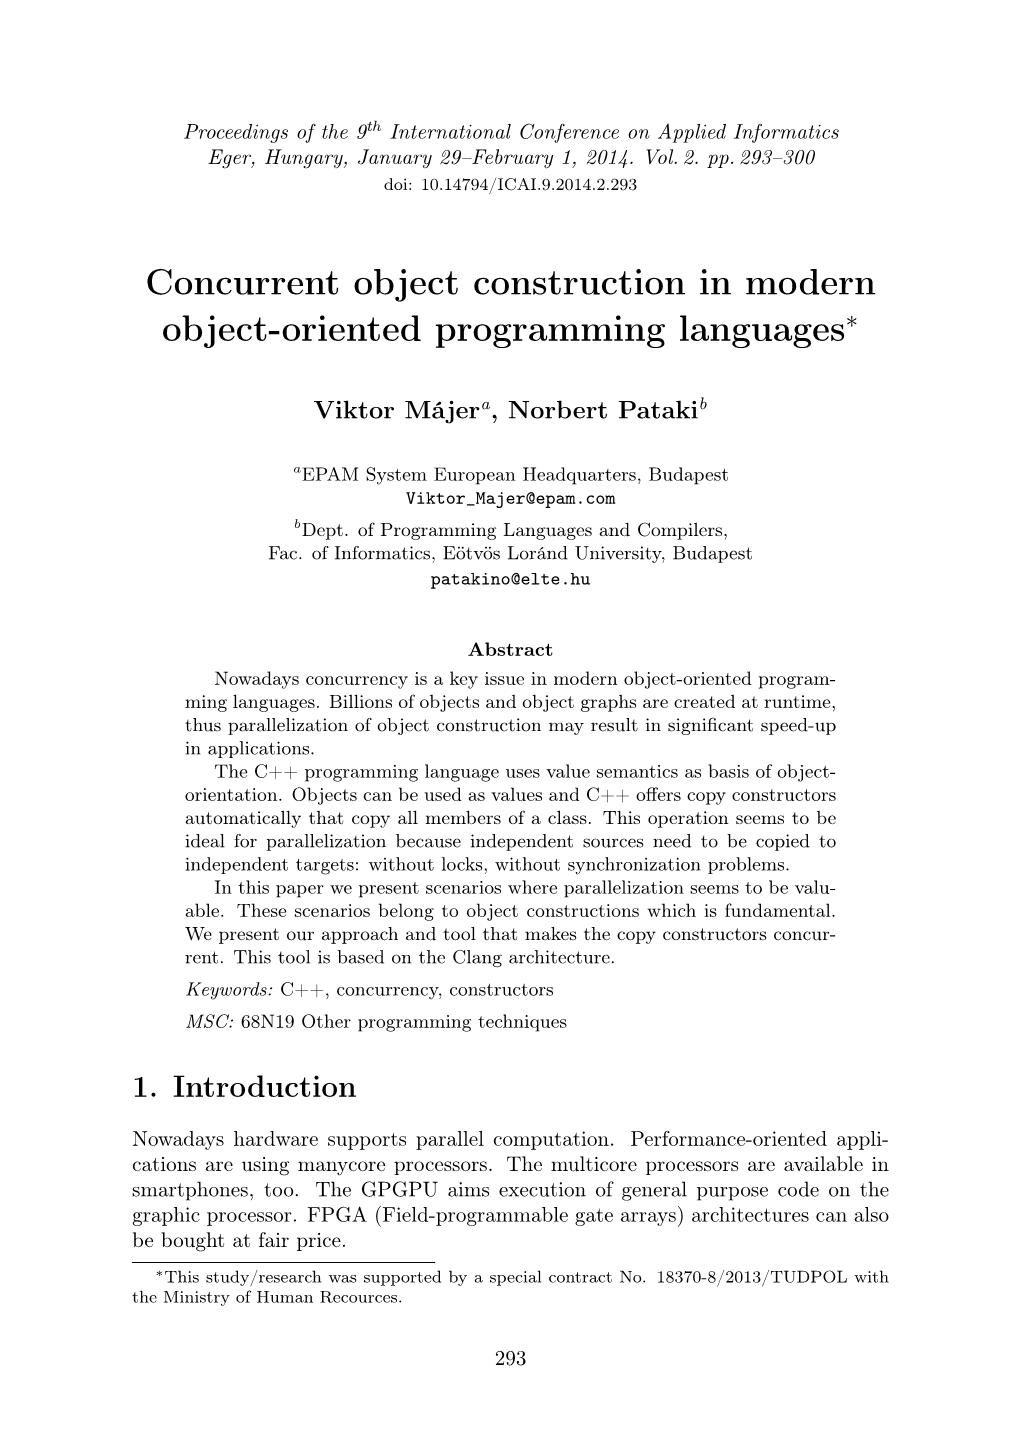 Concurrent Object Construction in Modern Object-Oriented Programming Languages∗